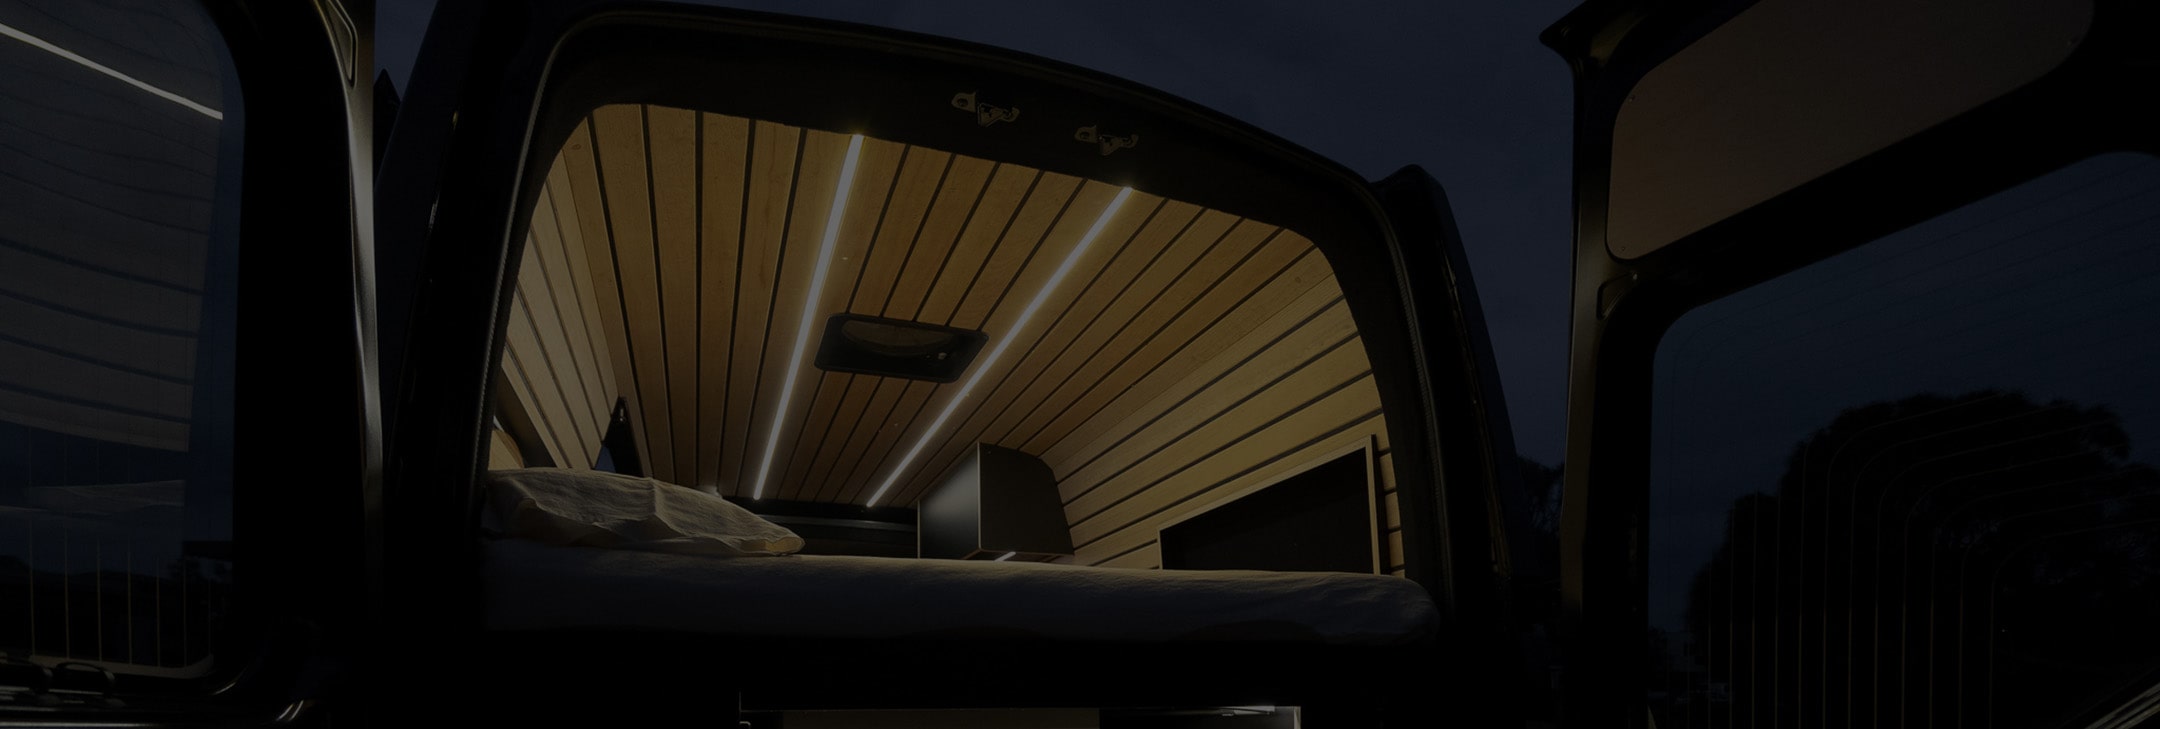 Plyco customer Built For Advanture's glorious RV fitout featuring the plywood supplier's lightweight Laminated Poplar Timber Veneer Sheets for caravan interiors